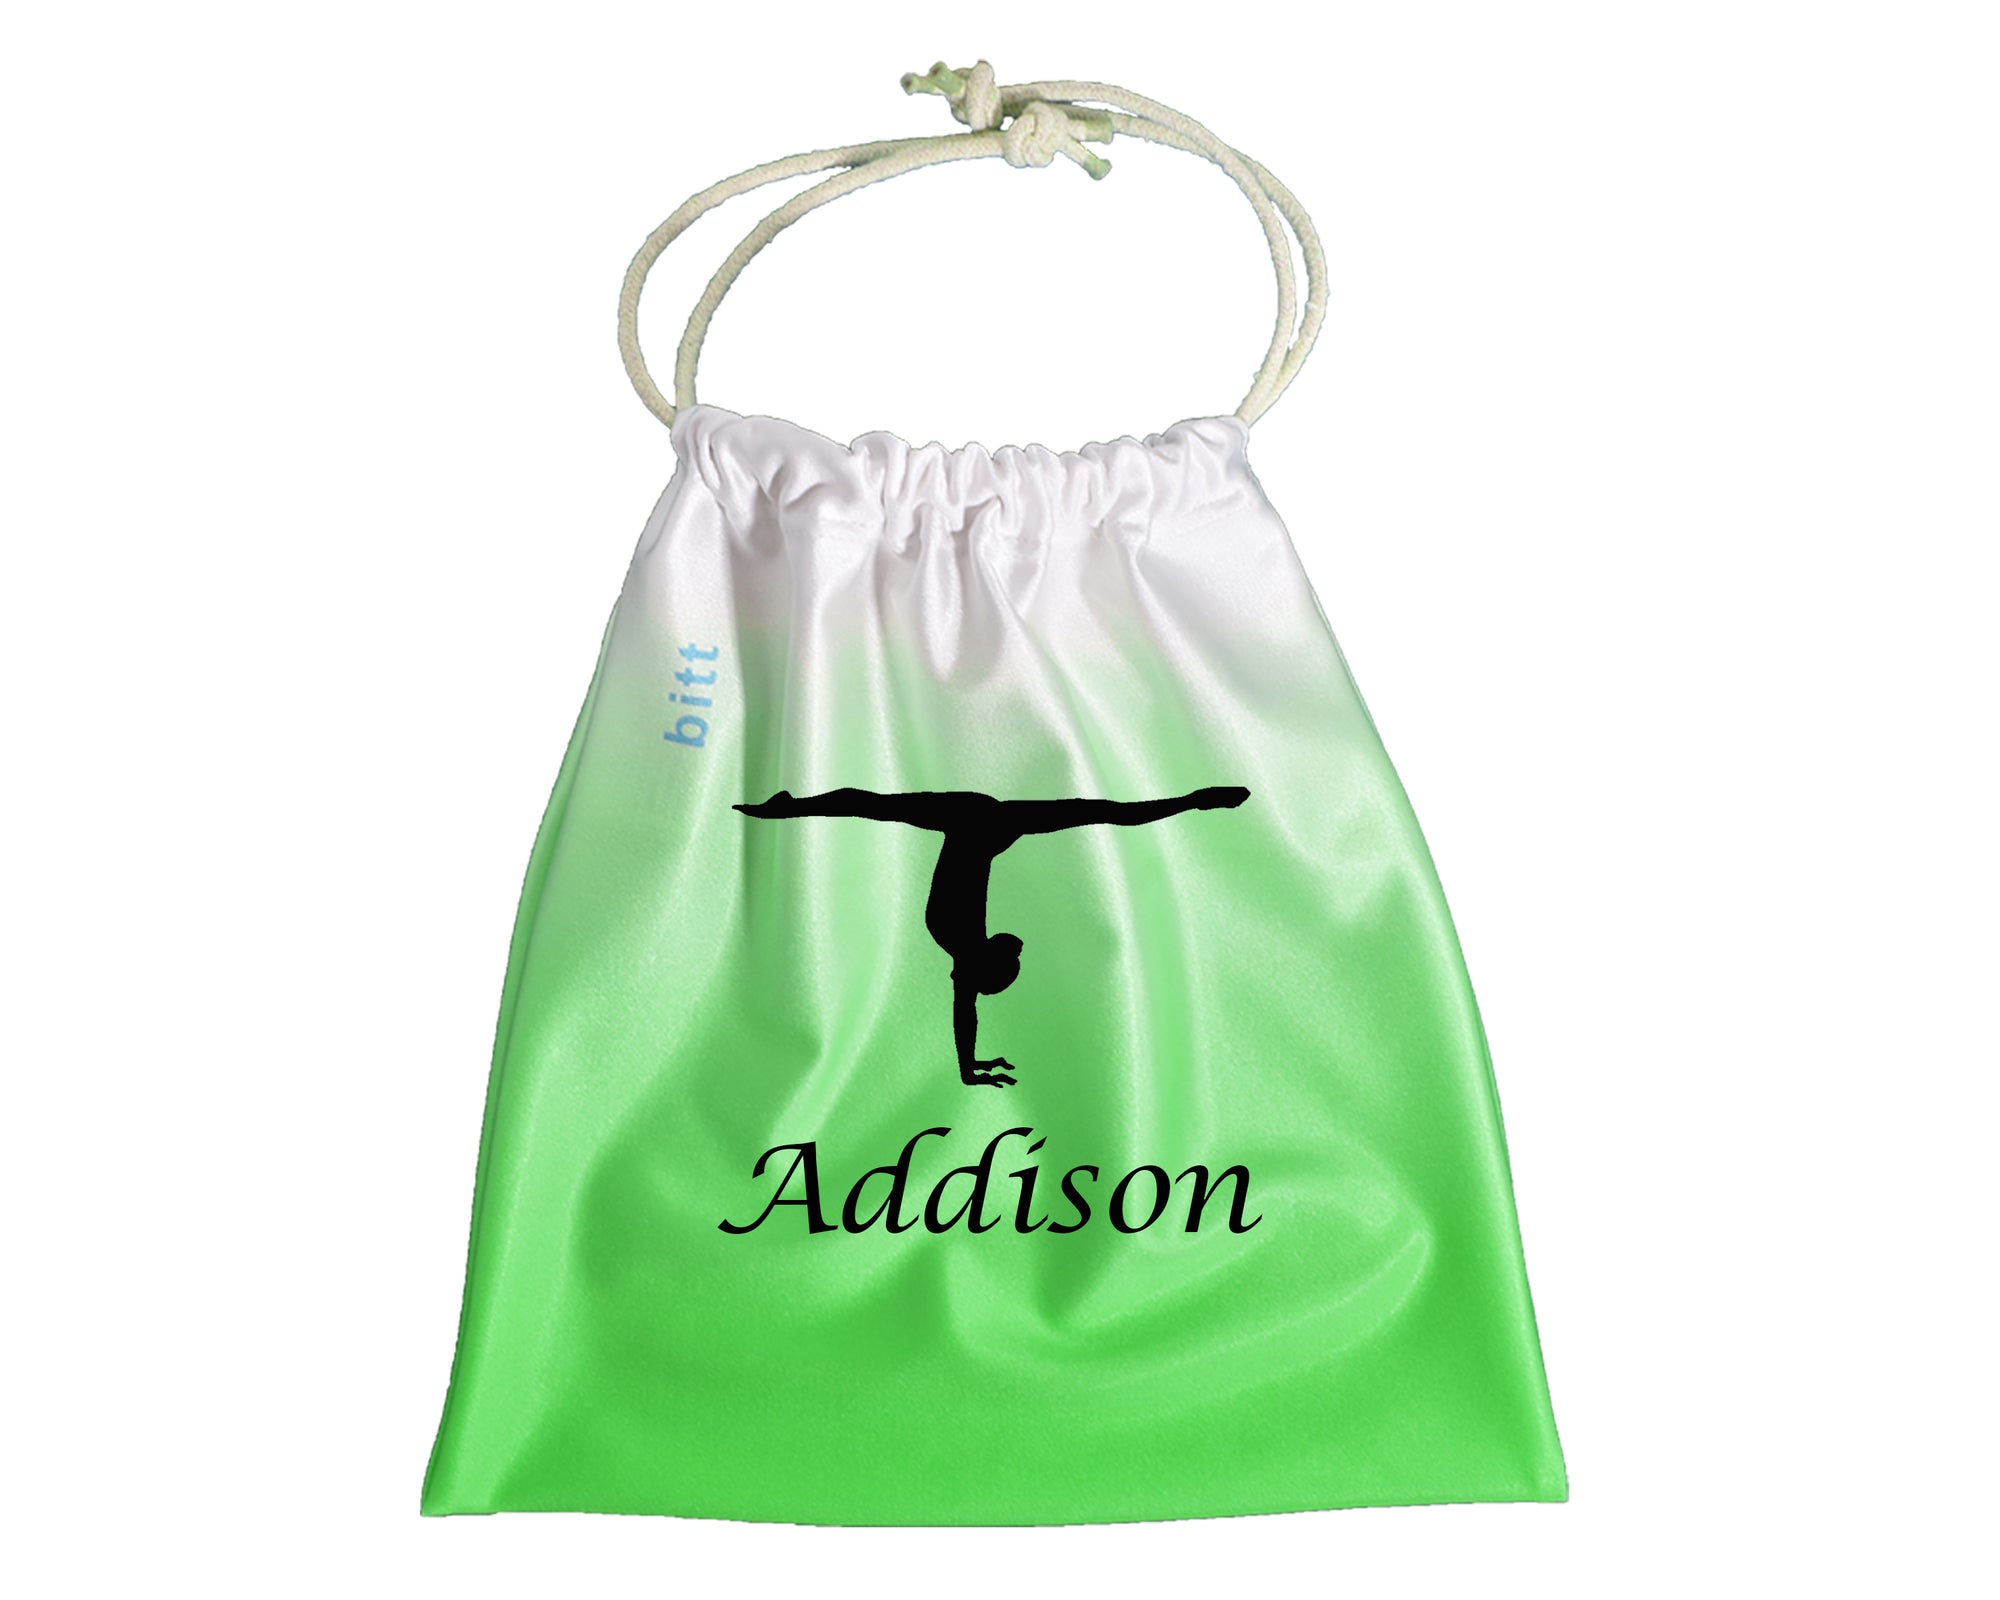 Personlized Gymnastics Grip Bag with Handstand in Lime Green & White Ombre